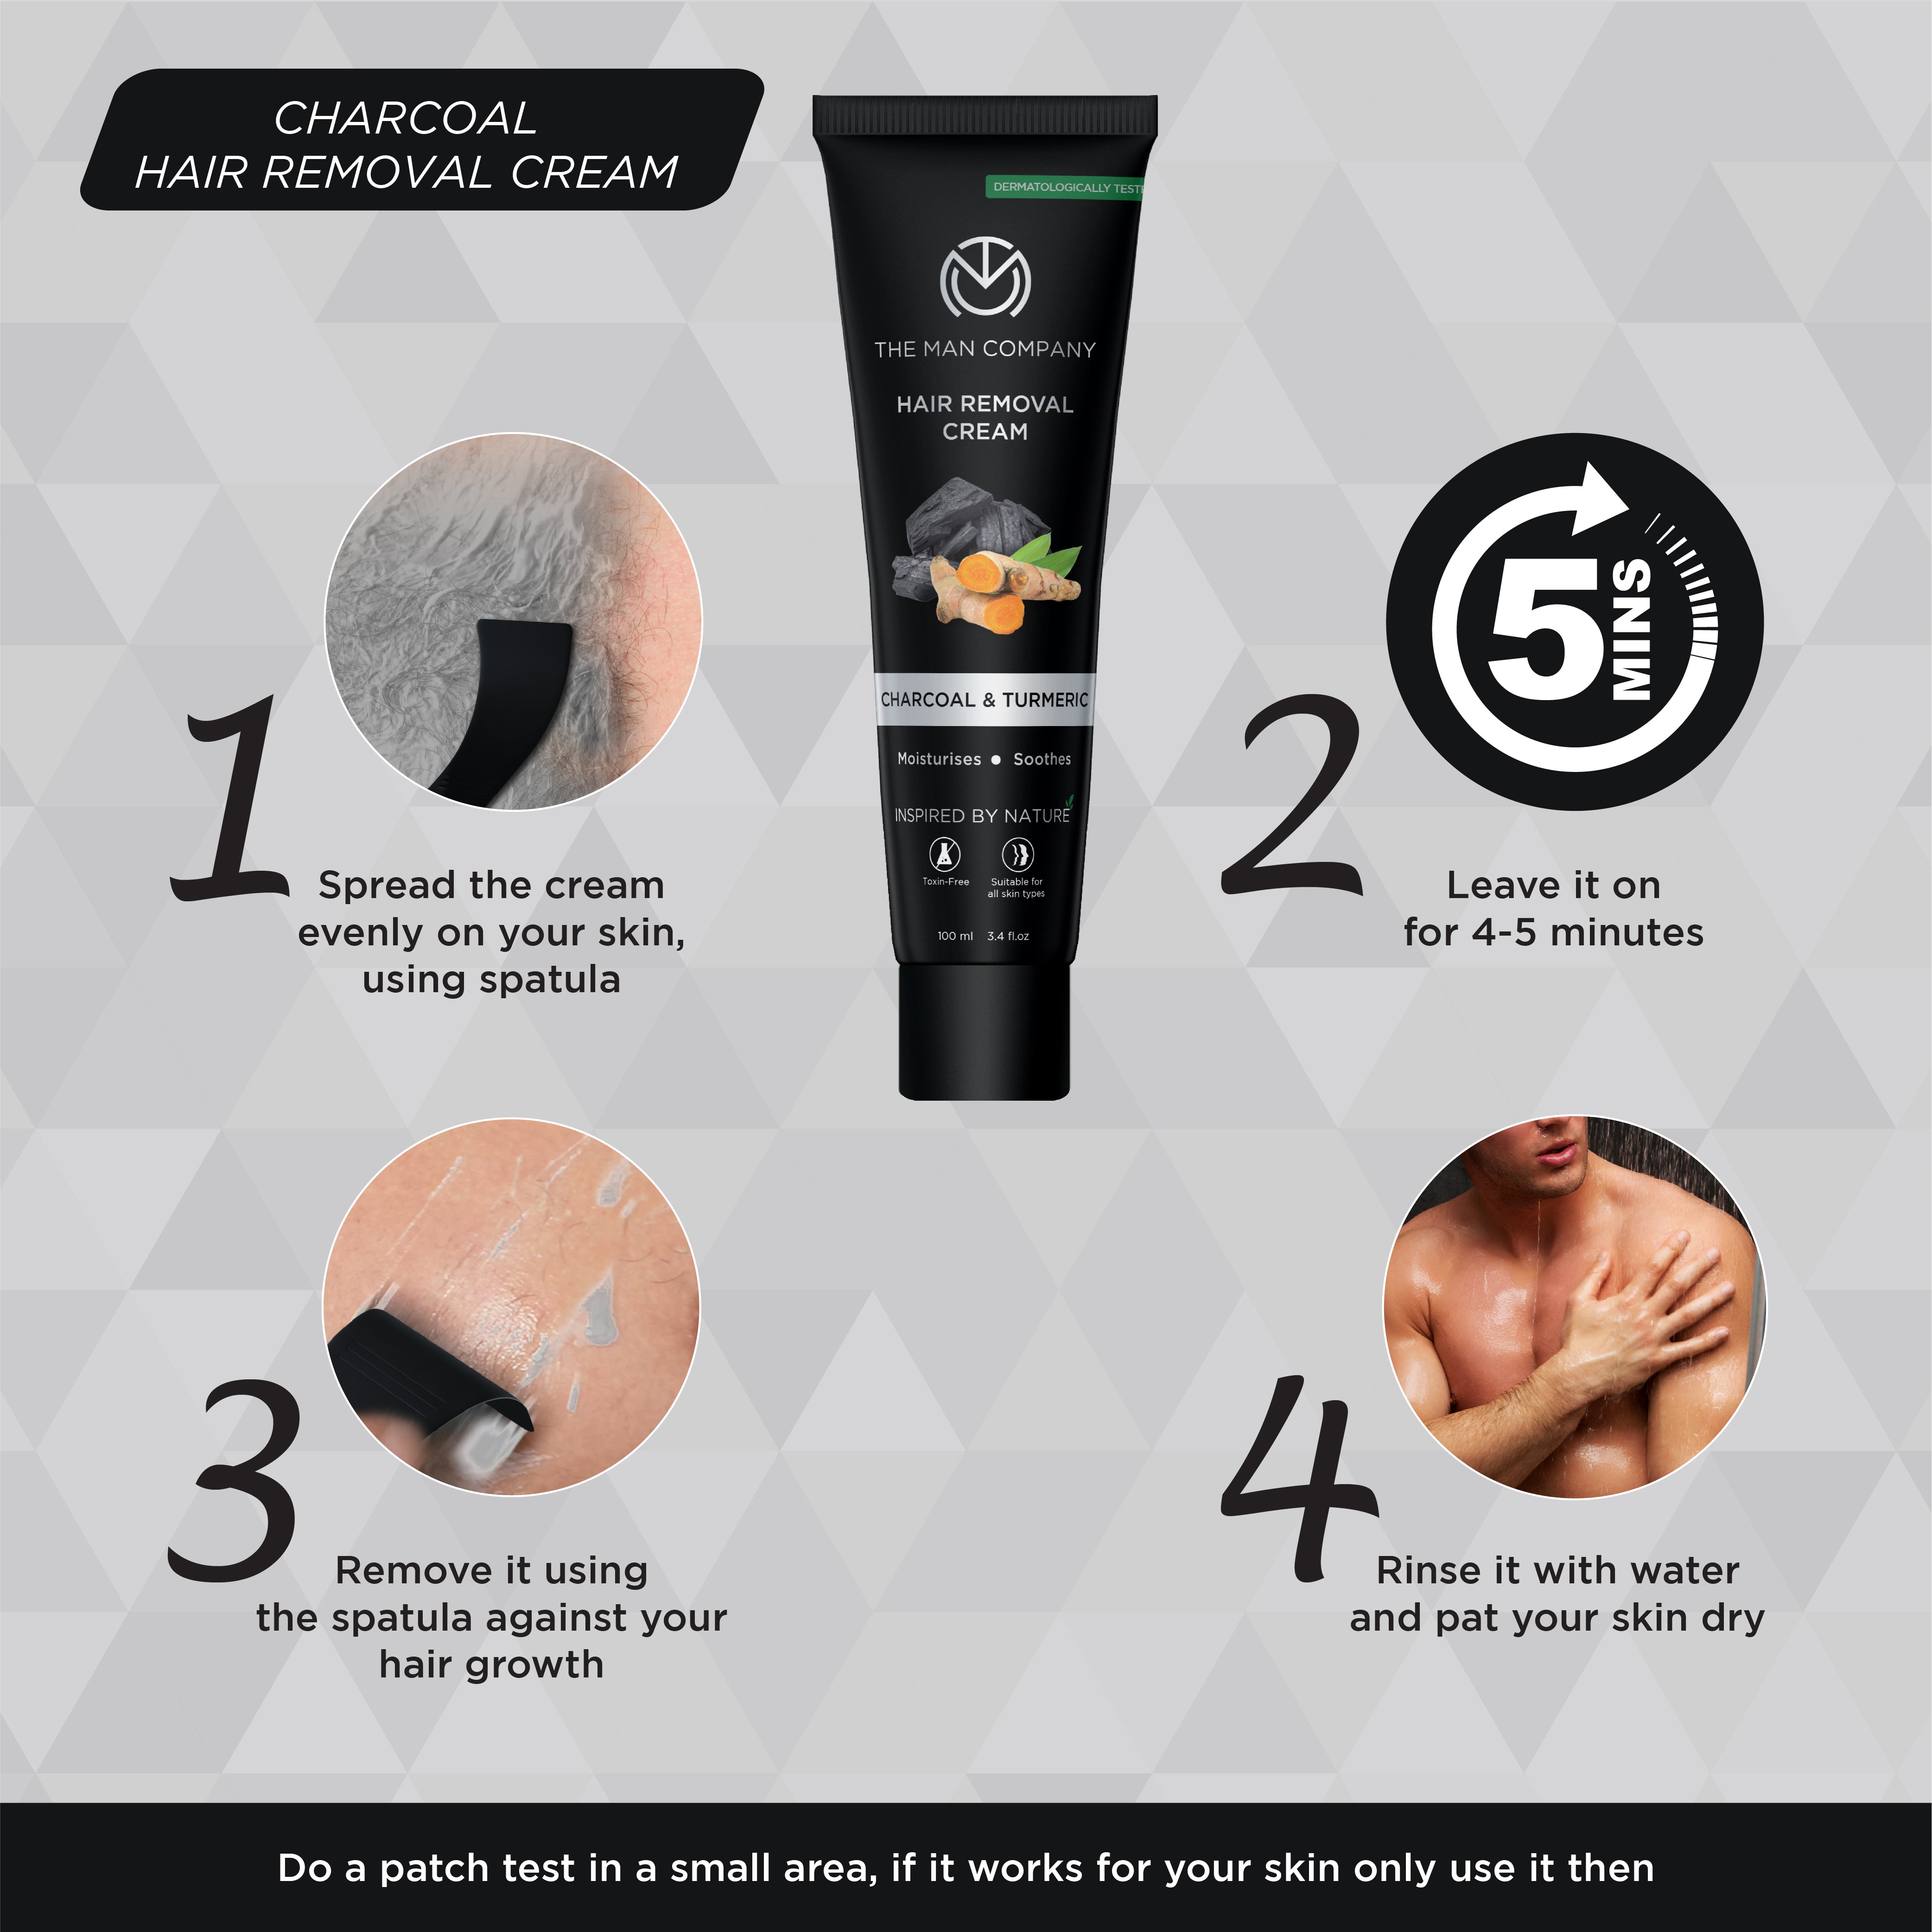 The Man Company Charcoal & Turmeric Hair Removal Cream for Men